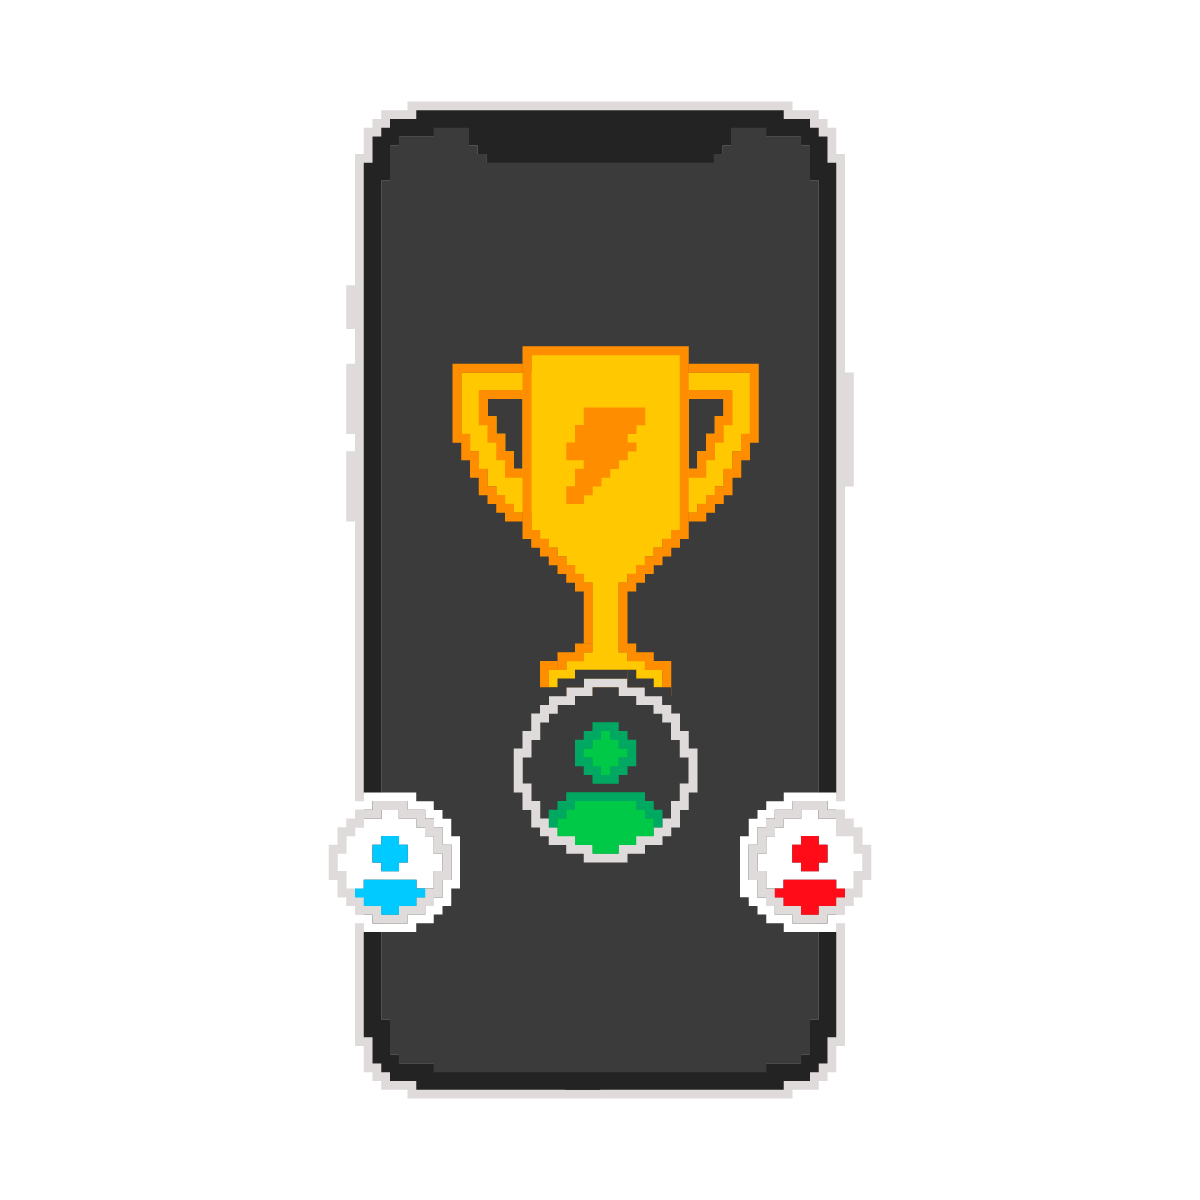 Pixelated illustration of an iPhone with a trophy and user profile icons